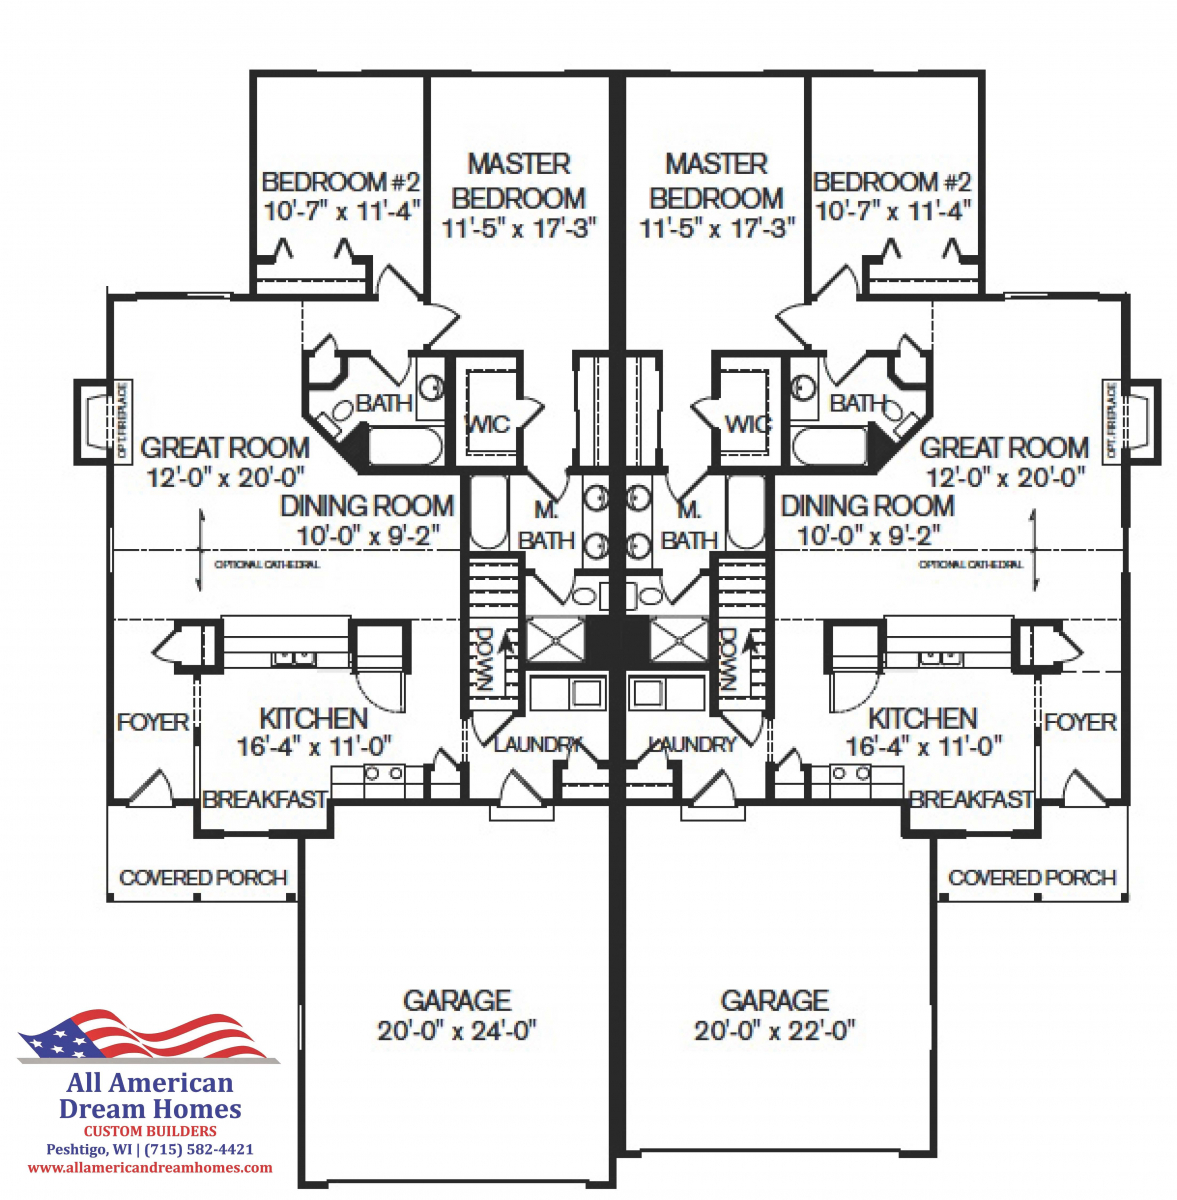 AAA-MULTI-FAMILY-RANCH-DES-MOINES-FLOORPLAN-1364-SQ-FT